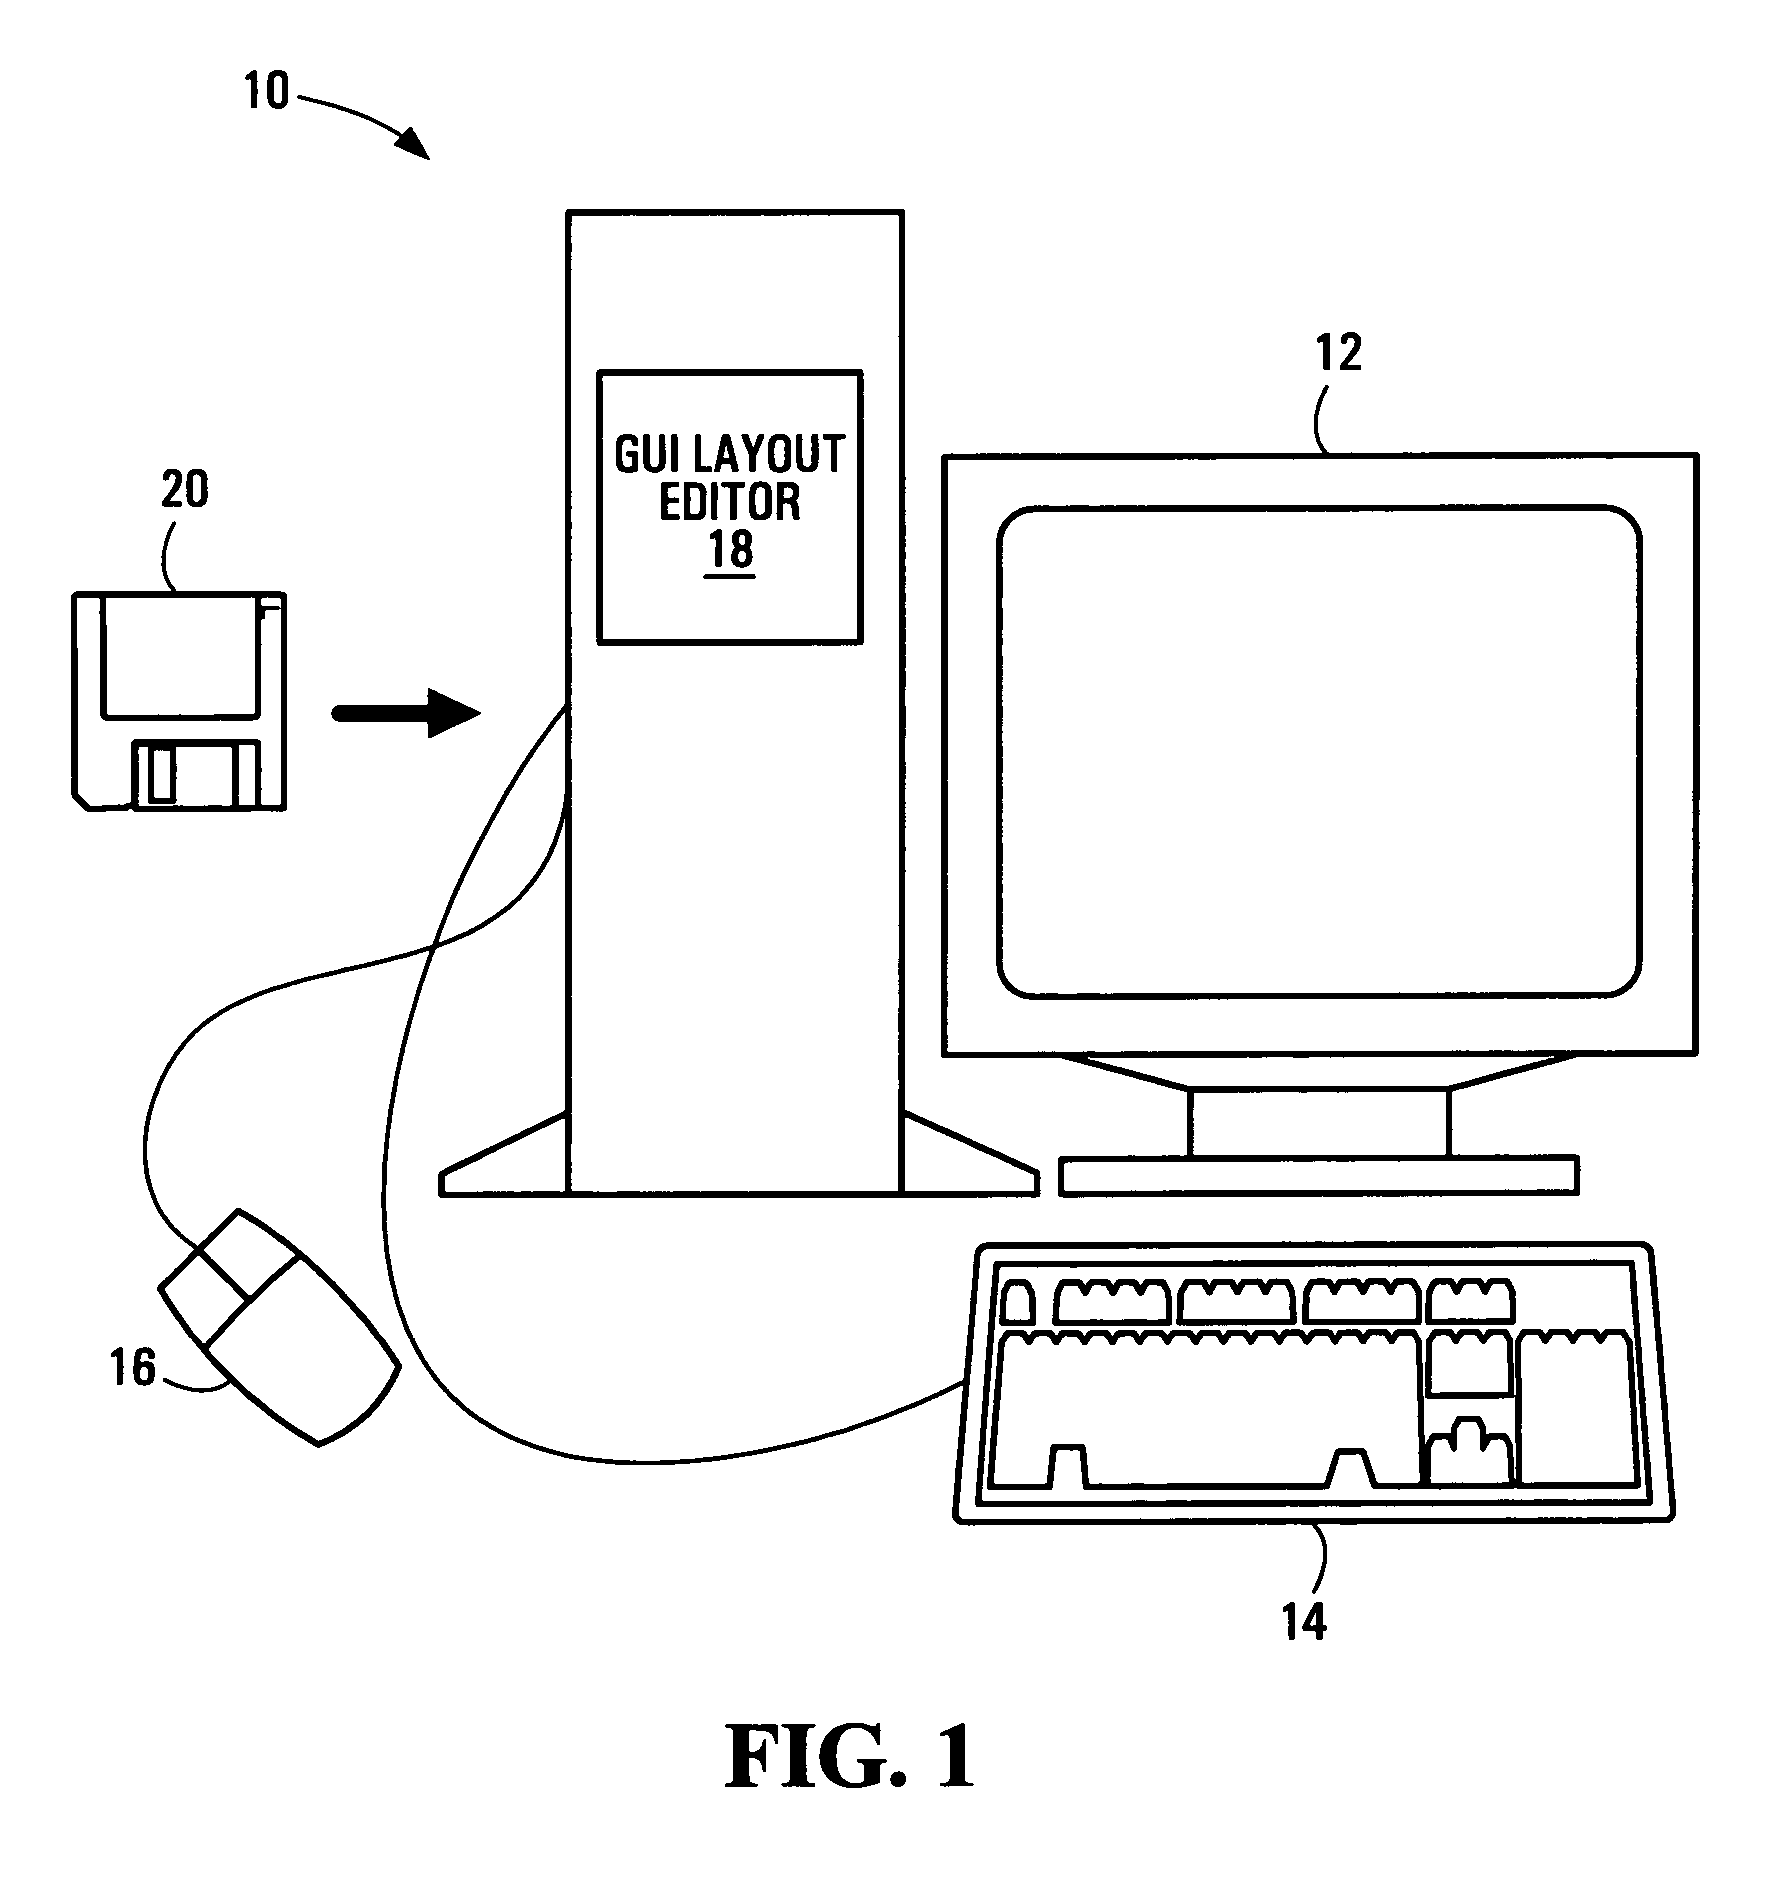 Display of enlarged visual container graphical user interface (GUI) components during GUI layout or design